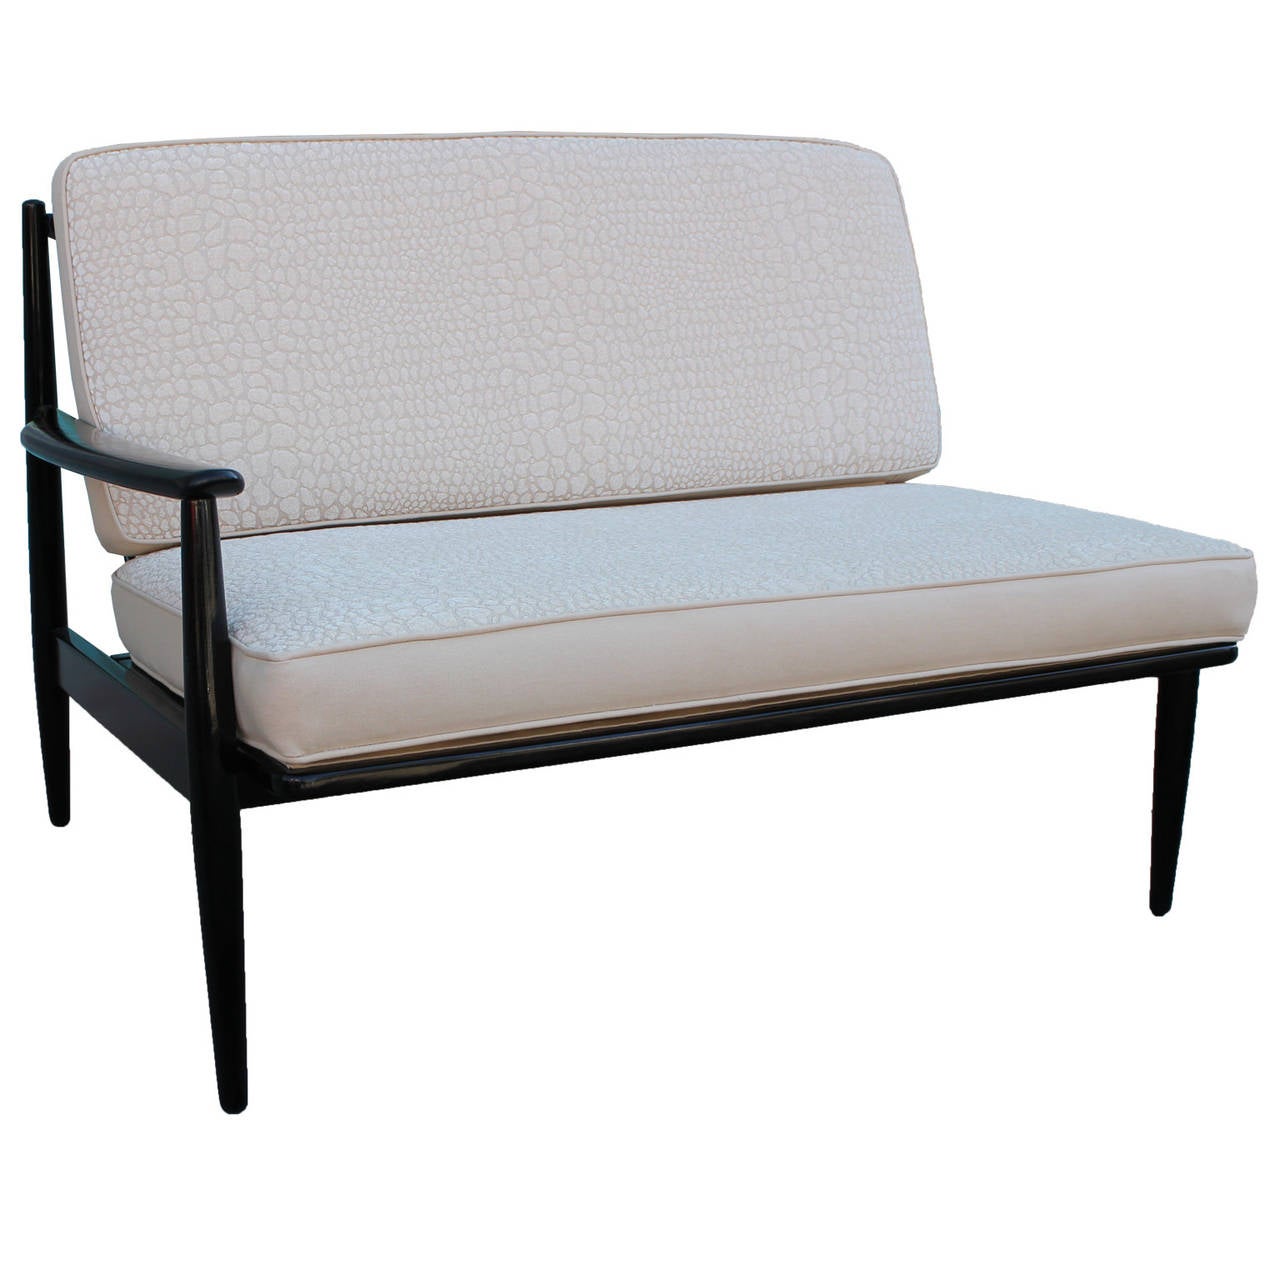 Unusual asymmetrical settee finished in black lacquer. Two tone upholstery with beige canvas and a beige textured crocodile chenille.  Cushions unzip for easy care.